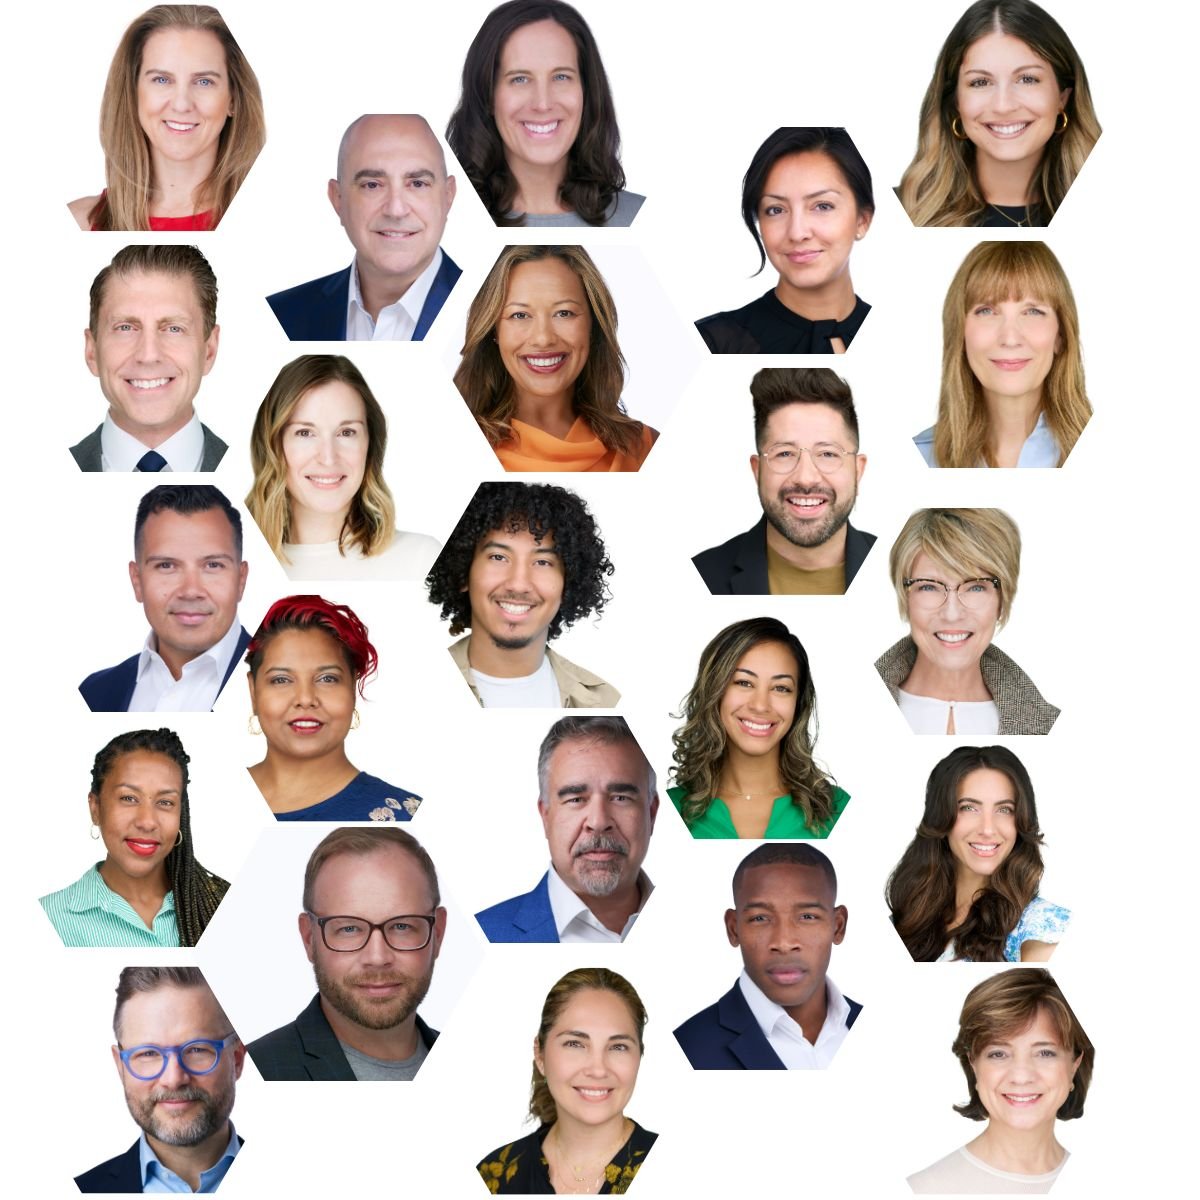 A collage of 25 diverse headshots arranged in a grid. Each person's headshot is displayed within a hexagonal frame. The group includes men and women of various ethnic backgrounds, skin tones, hair colors, and styles. Most people are smiling and dressed in professional attire.